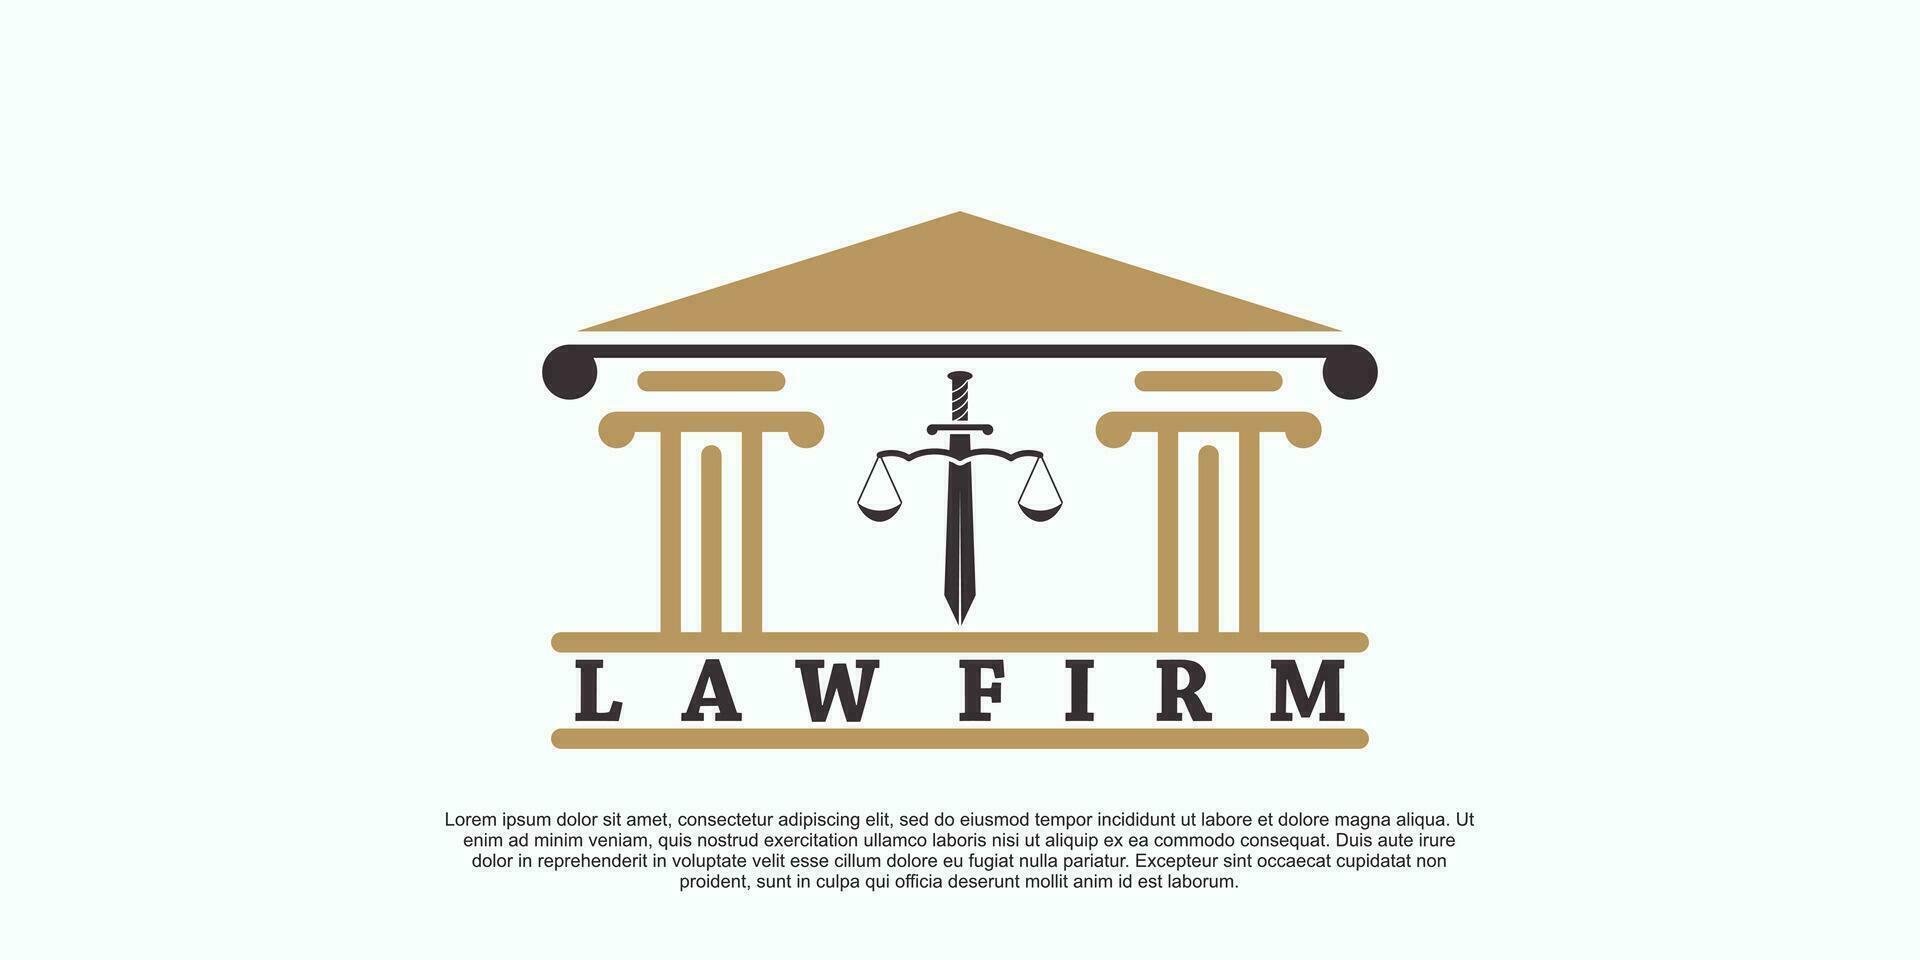 law firm logo design with modern concept vector